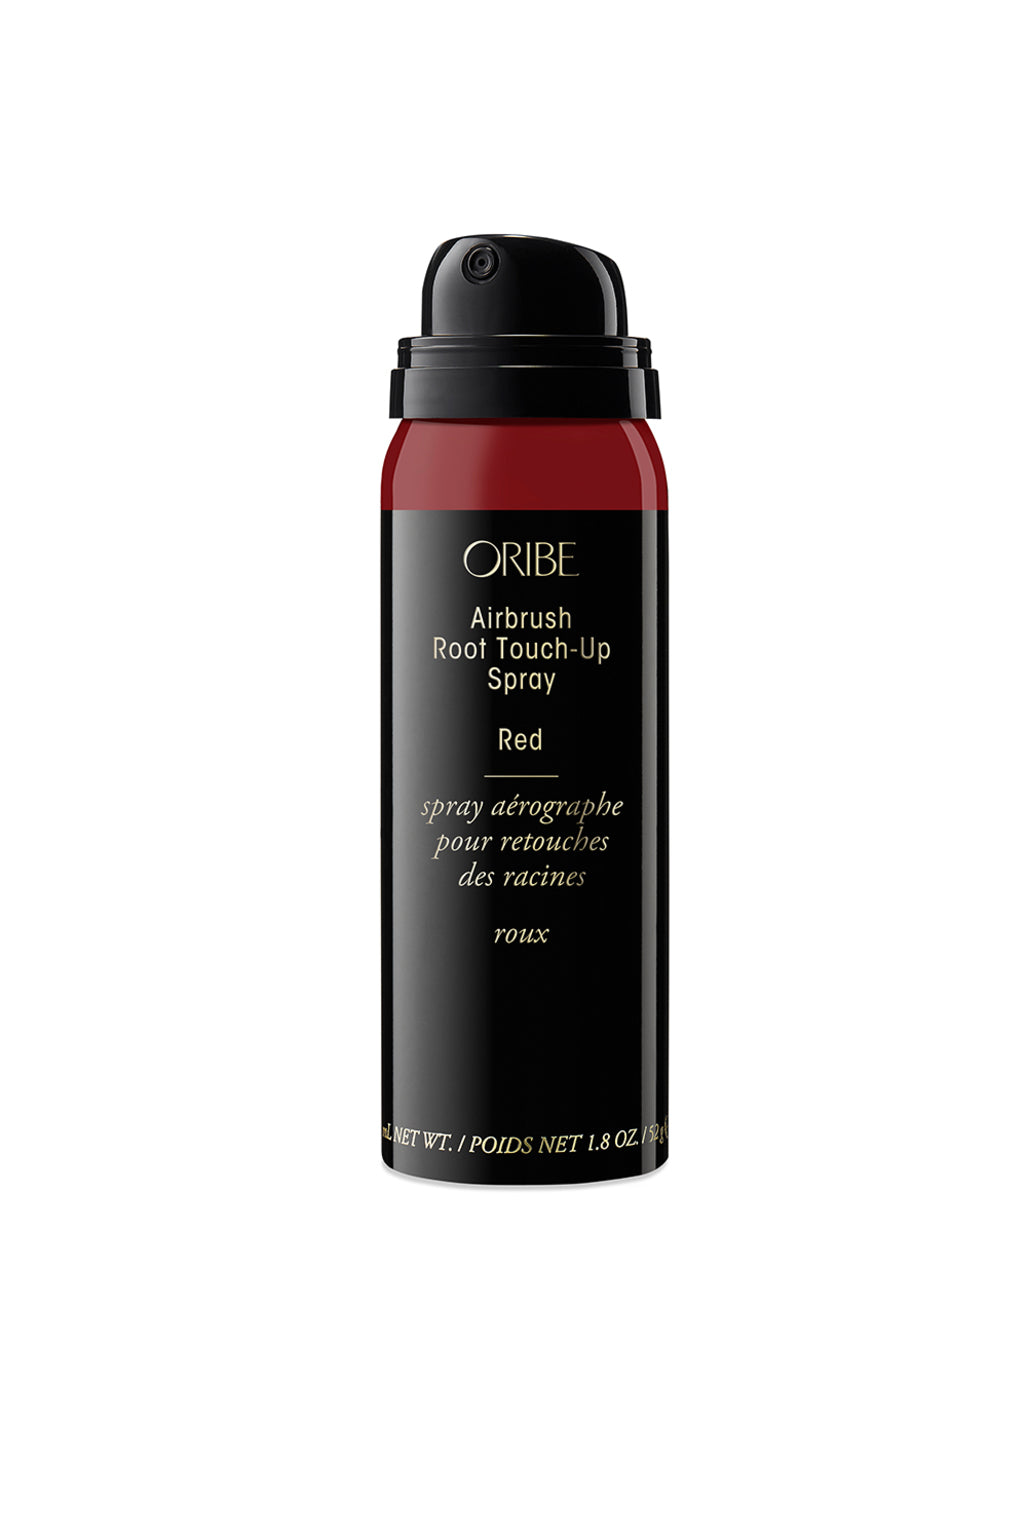 Oribe Red Root Touch-Up Spray